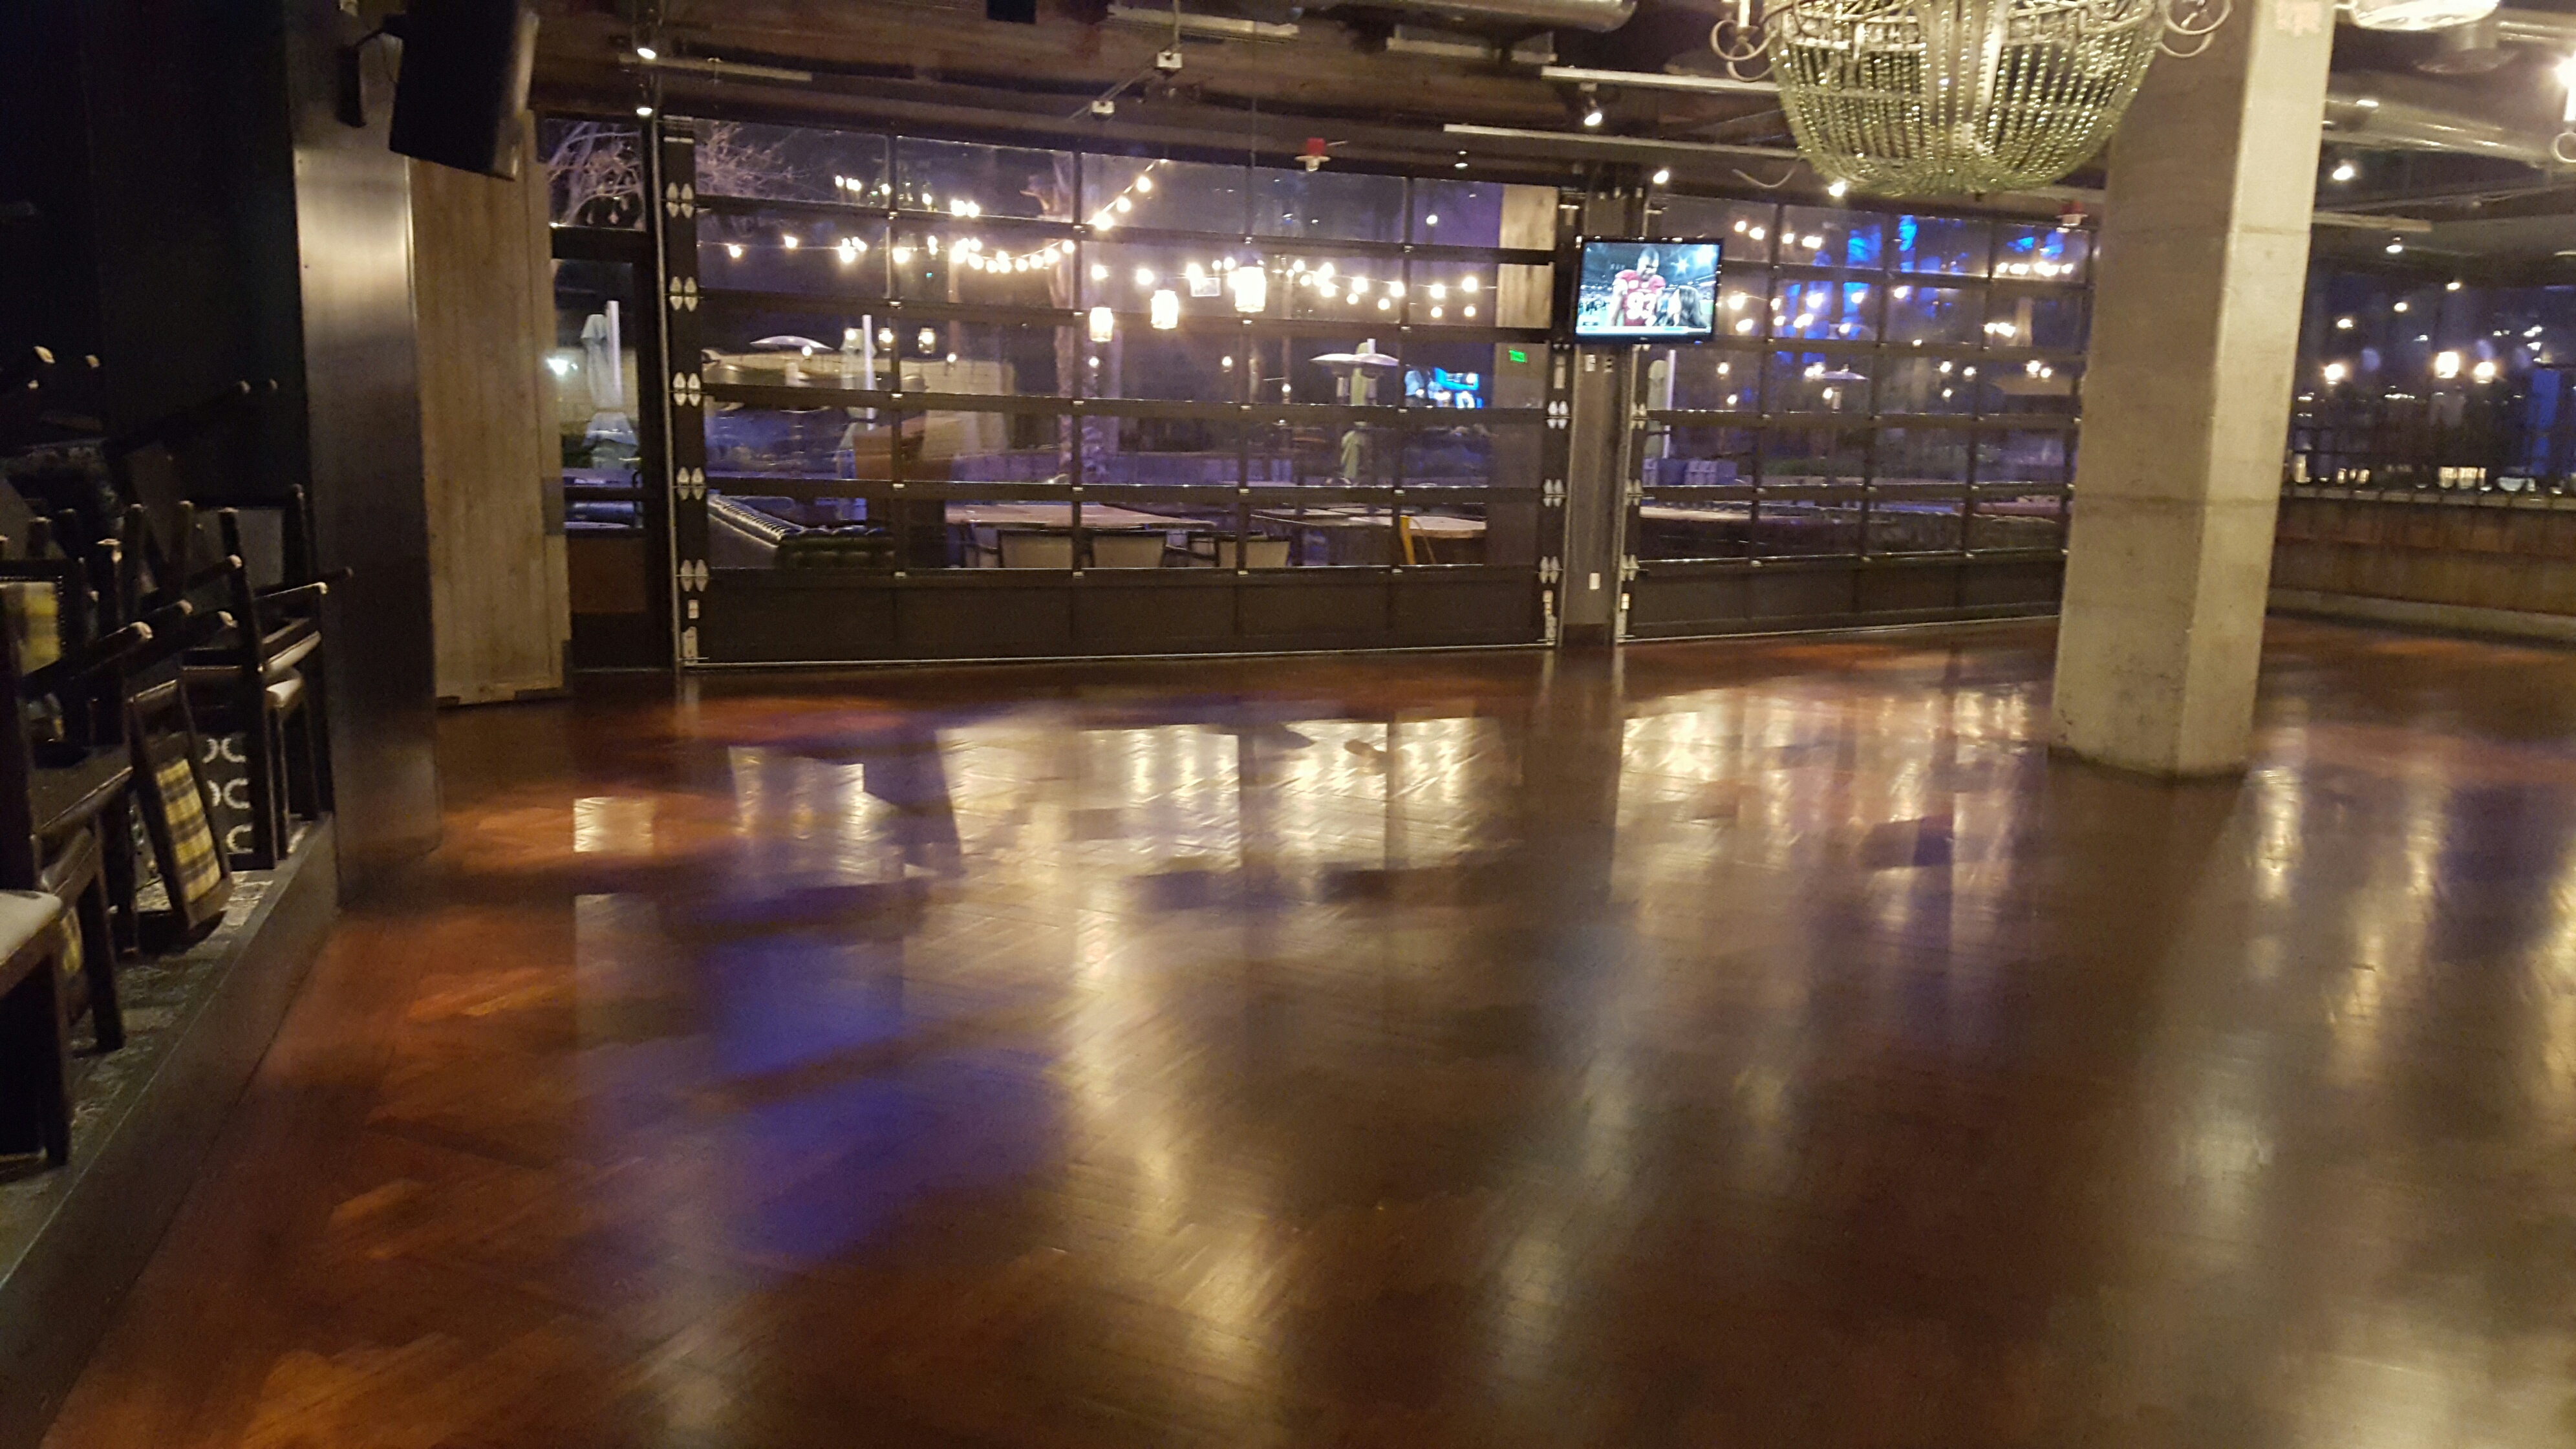 Commercial hardwood flooring project at the Hard Rock Casino